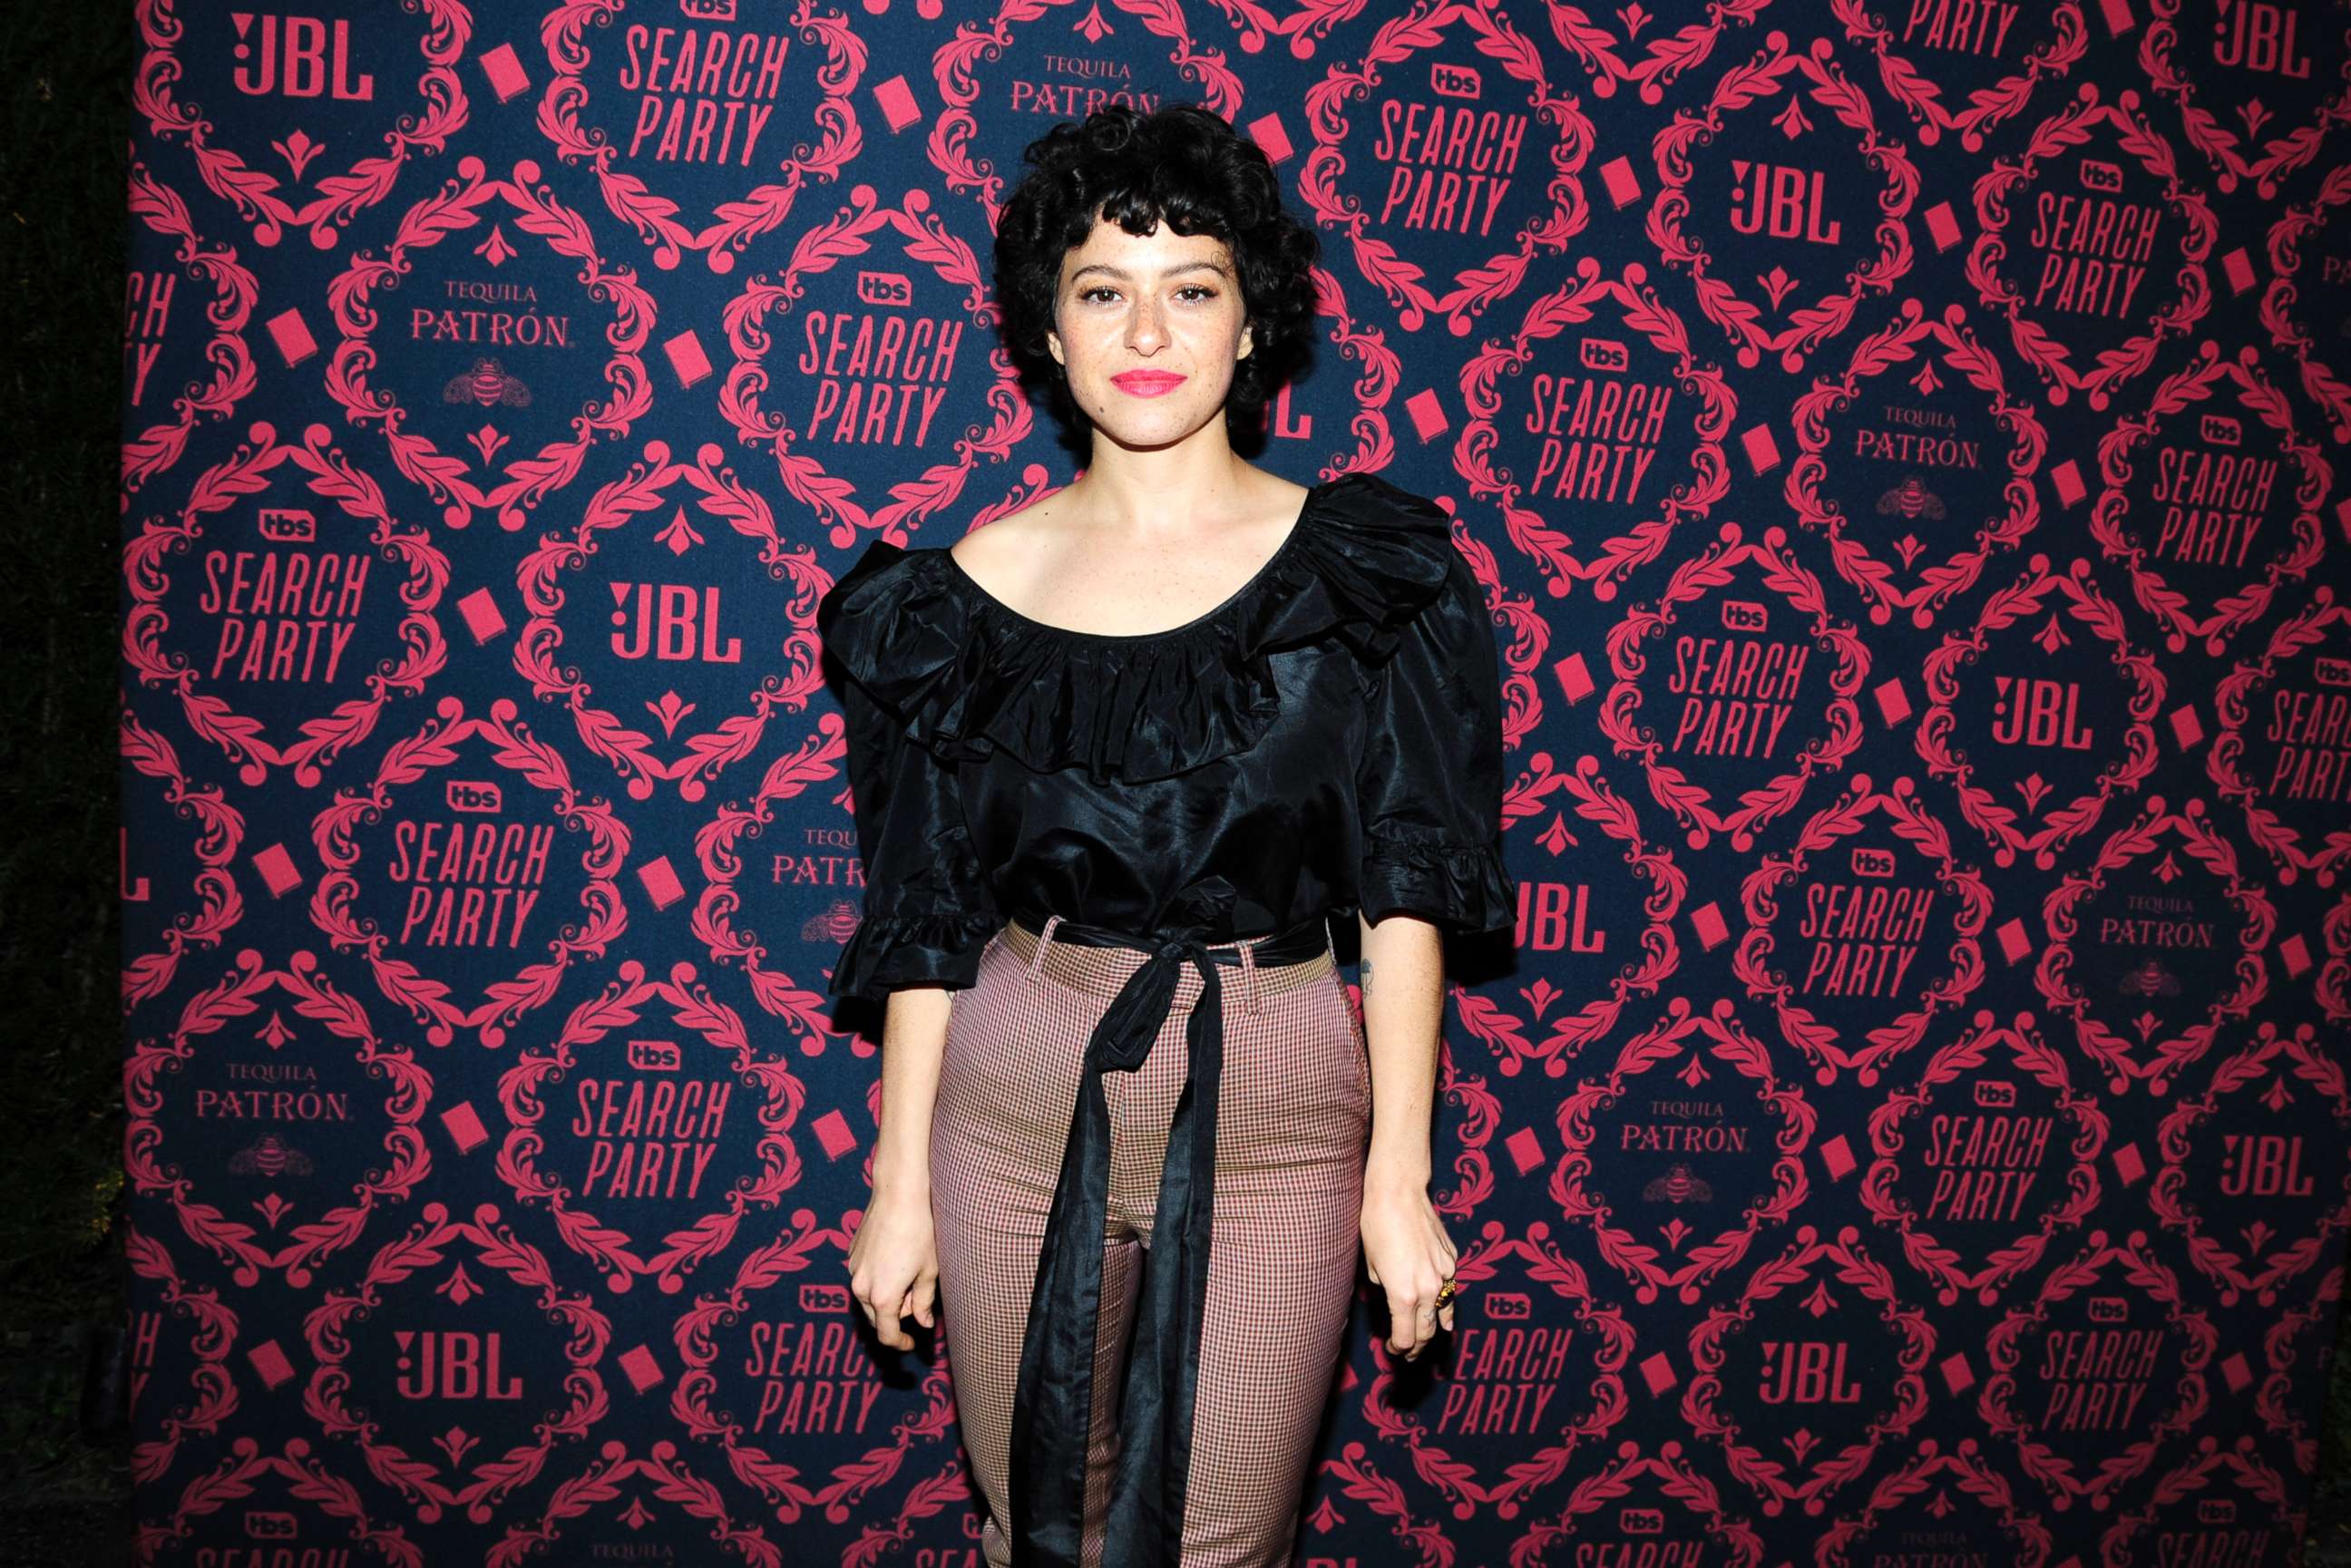 PHOTO: Alia Shawkat attends the premiere of "Search Party" at Public Hotel, Nov. 8, 2017, in New York City.